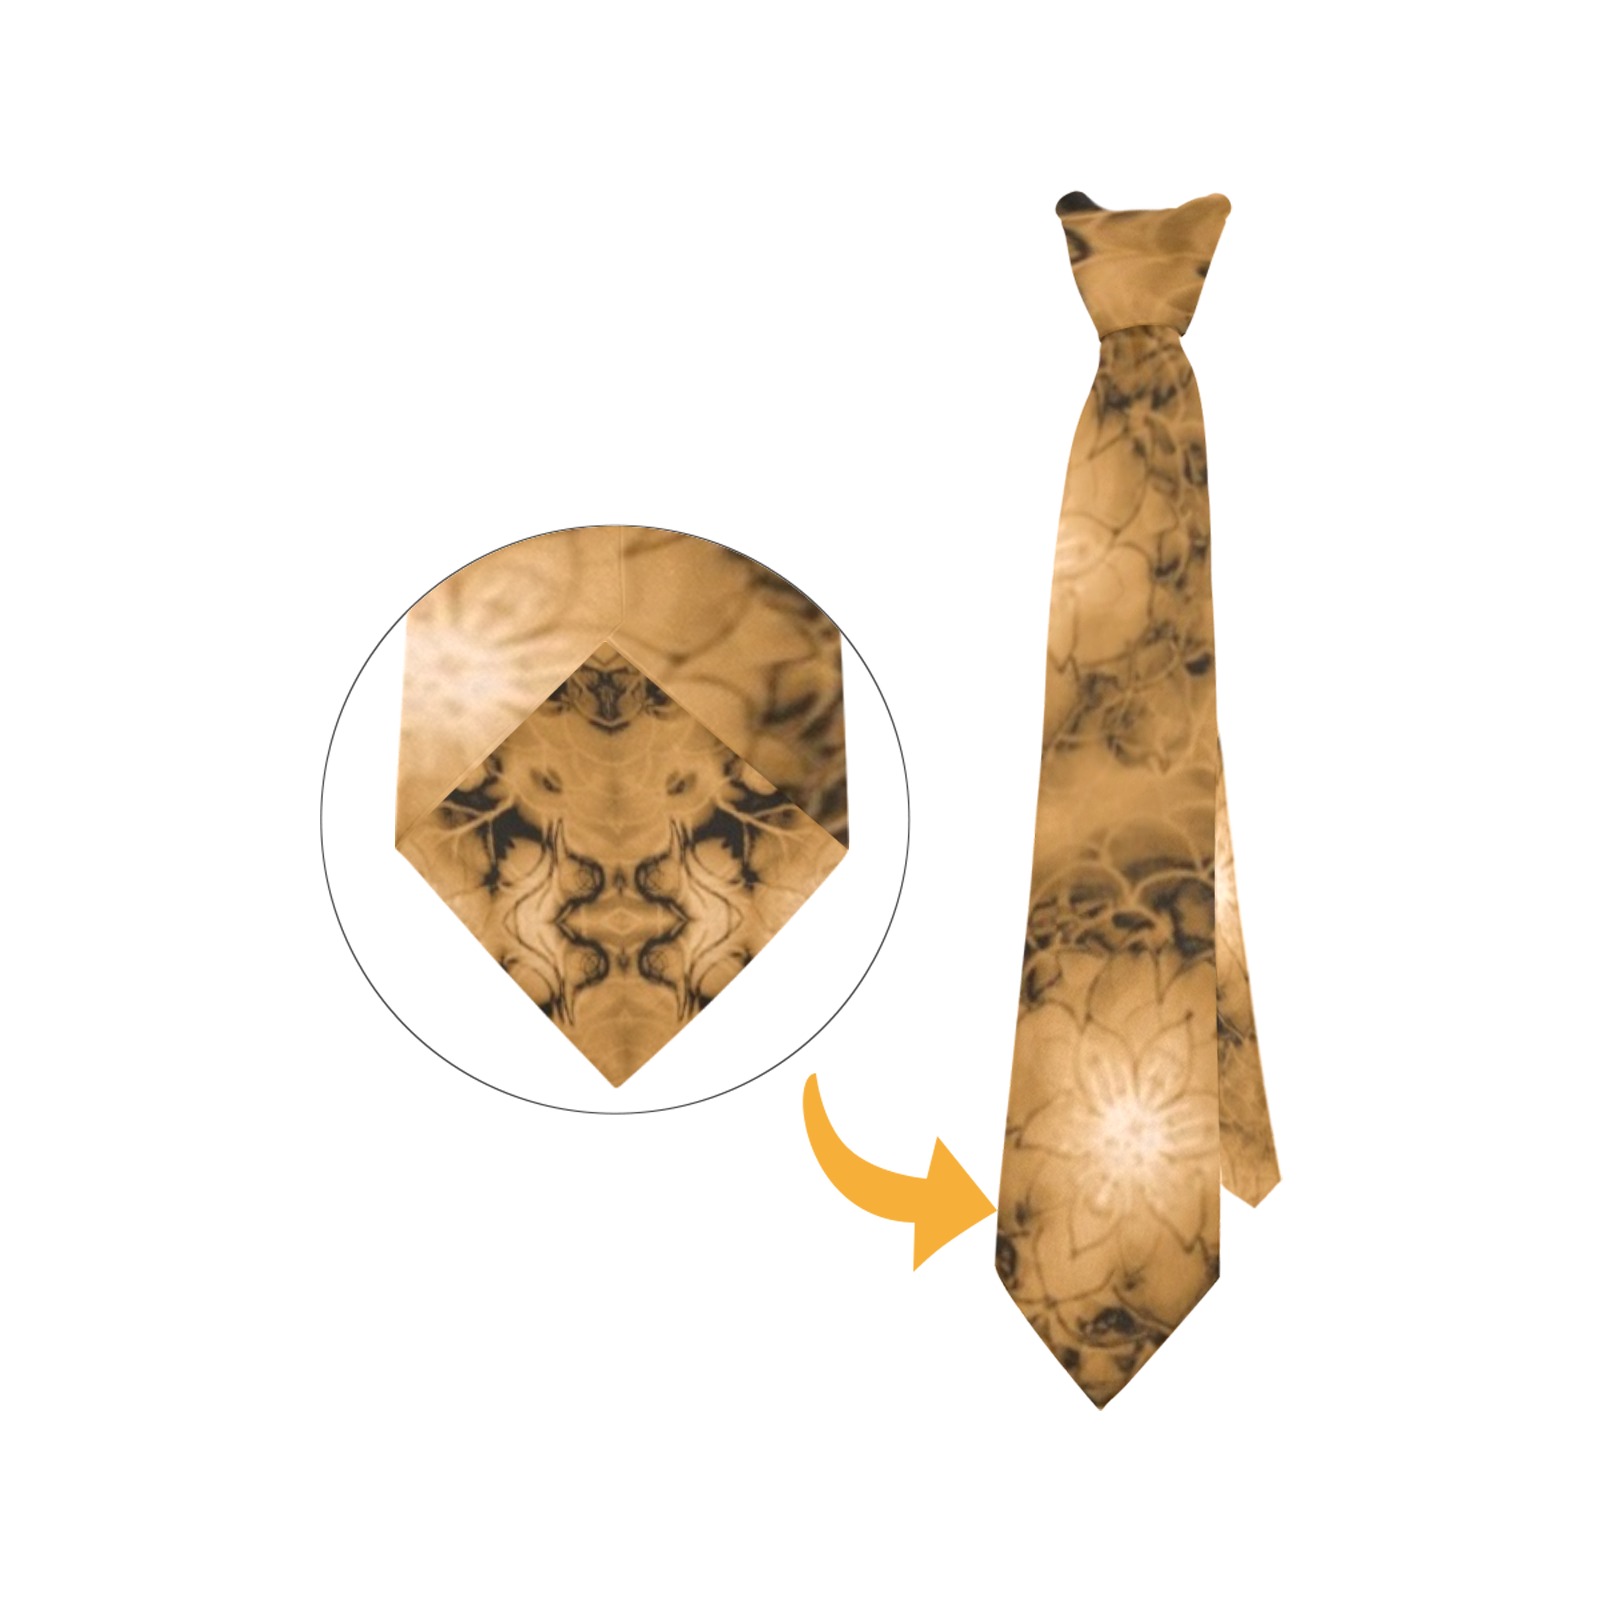 Nidhi decembre 2014-pattern 7-44x55 inches-brown Custom Peekaboo Tie with Hidden Picture